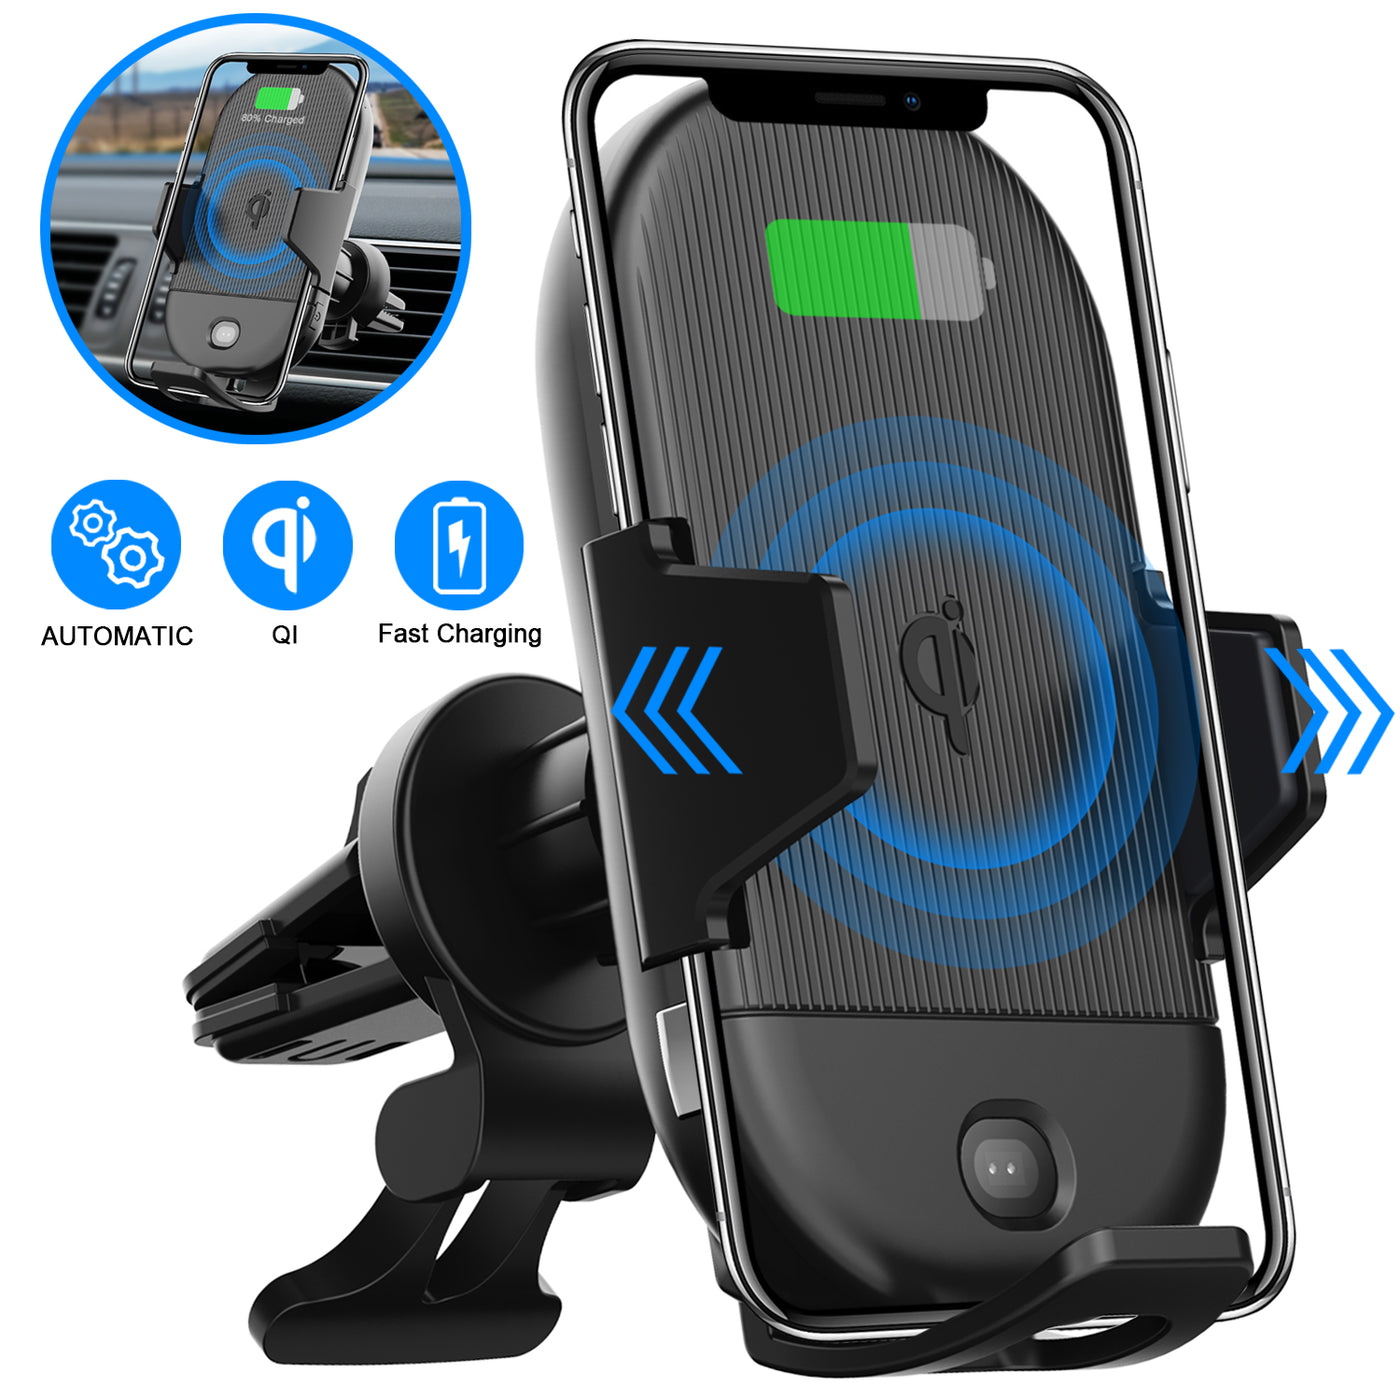 LETSCOM Line B Wireless Car Charger, Auto-Clamping, 15W Qi Fast Charging